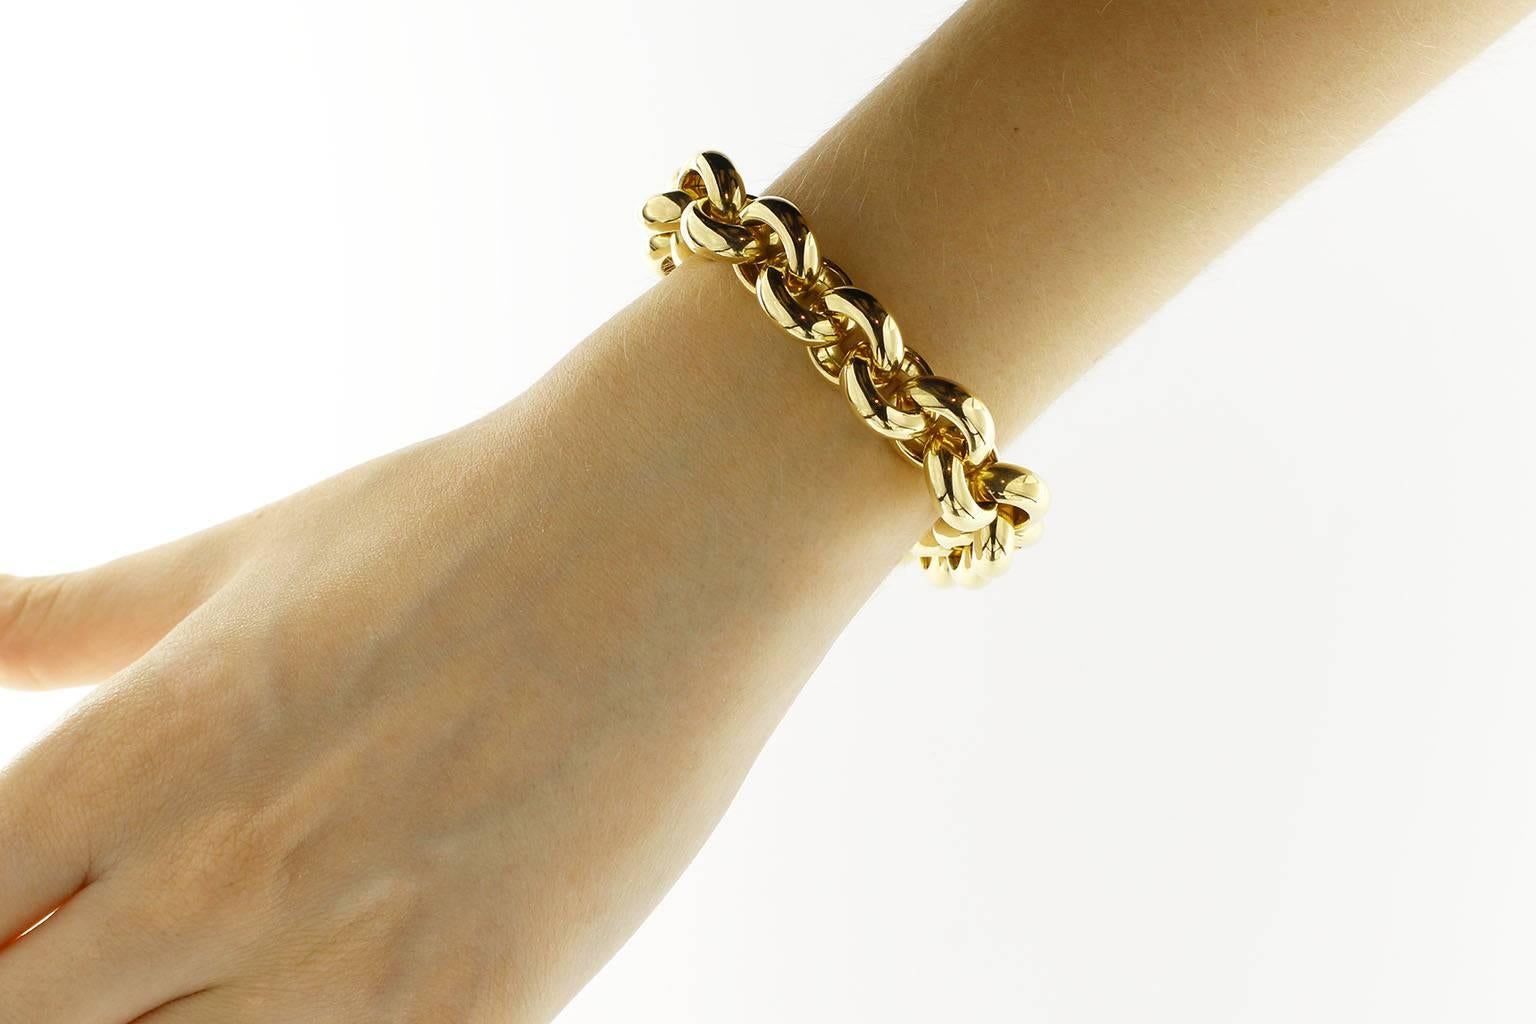 Alex Jona design collection, hand crafted in Italy, 18 Karat yellow gold link chain bracelet. 
Dimensions : L x 20 mm, W x 14 mm - L x 0.78 in, W x 0.55 in.
Alex Jona jewels stand out, not only for their special design and for the excellent quality